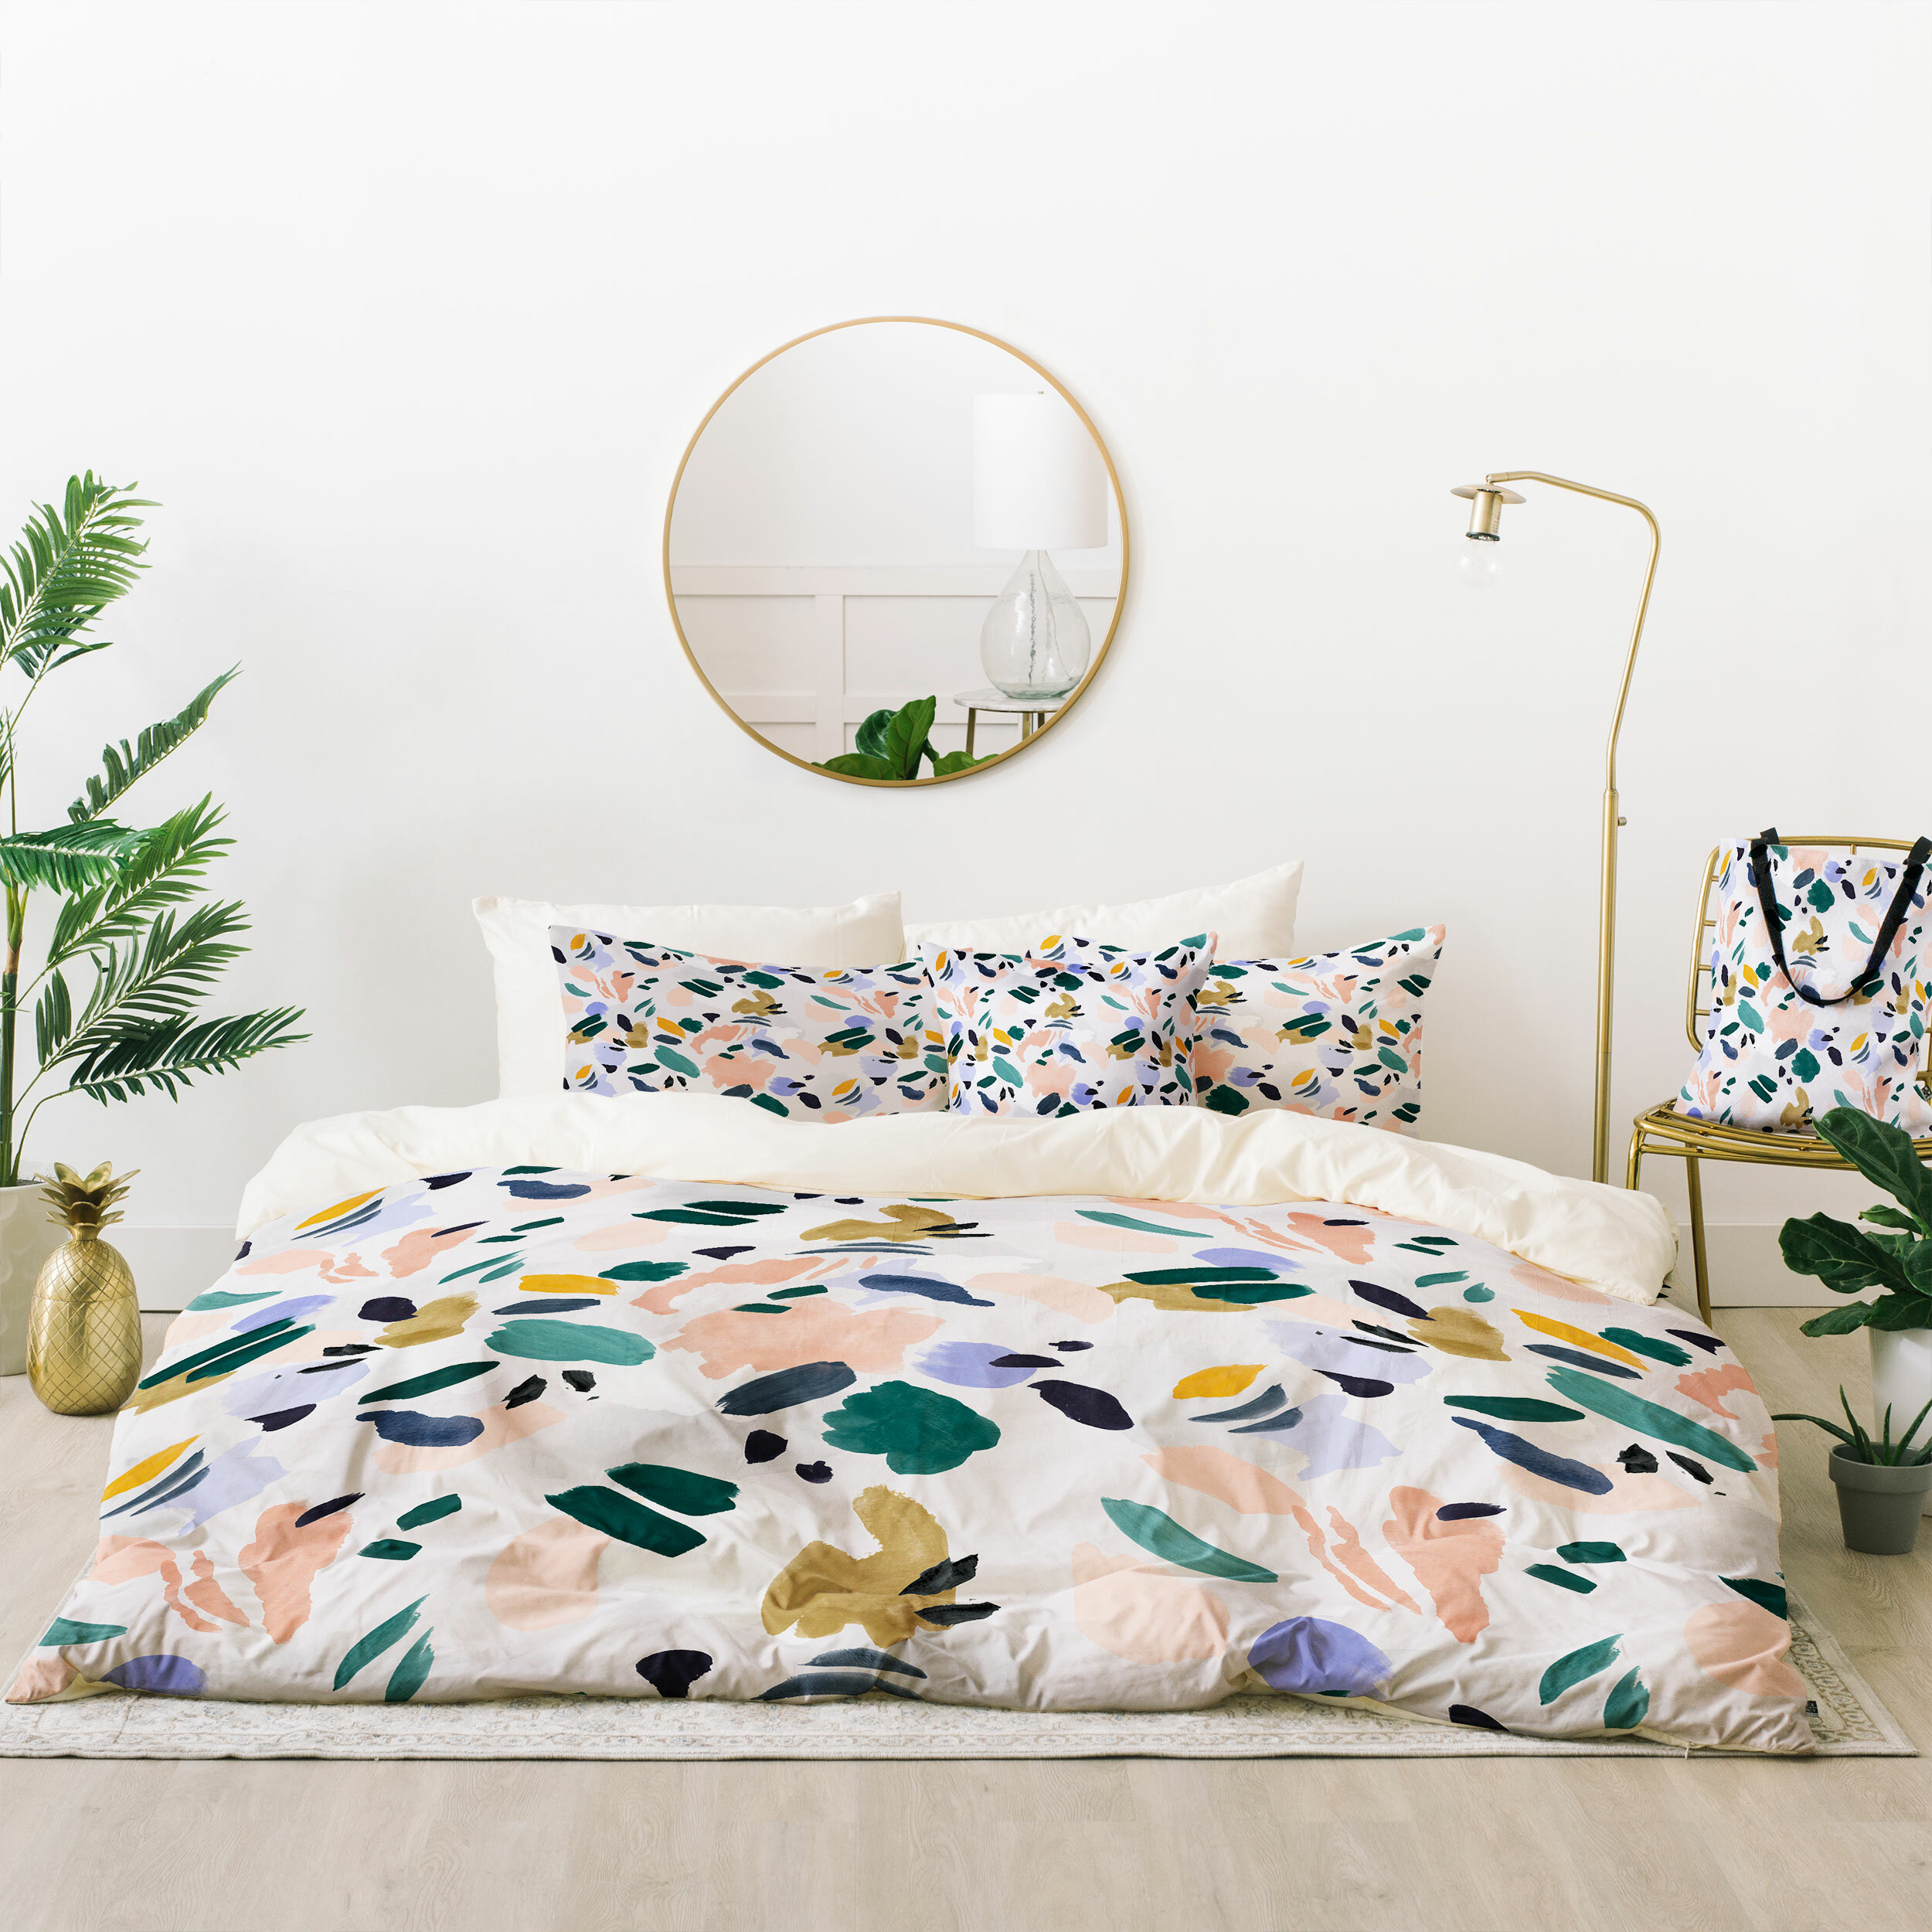 Kids bedding set with terrazzo print made in The Netherlands  fitted sheet  duvet cover   100/% cotton satin